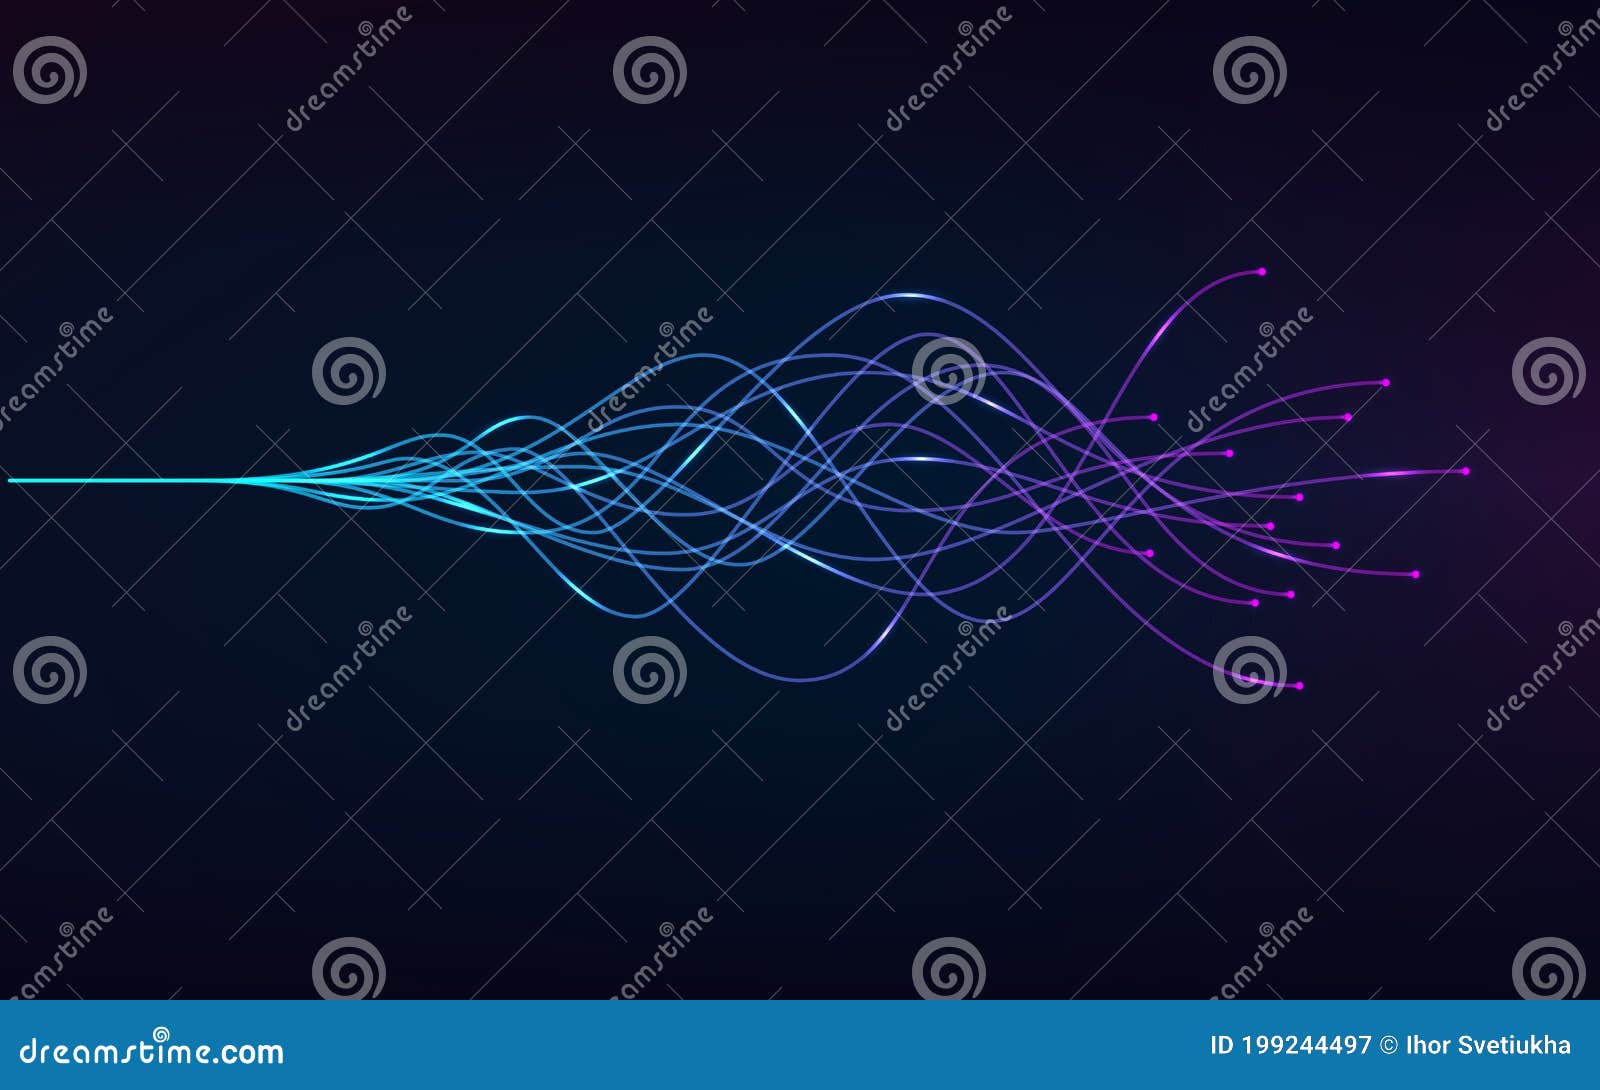 ai - artificial intelligence and deep learning concept of neural networks. wave equalizer. blue and purple lines. 